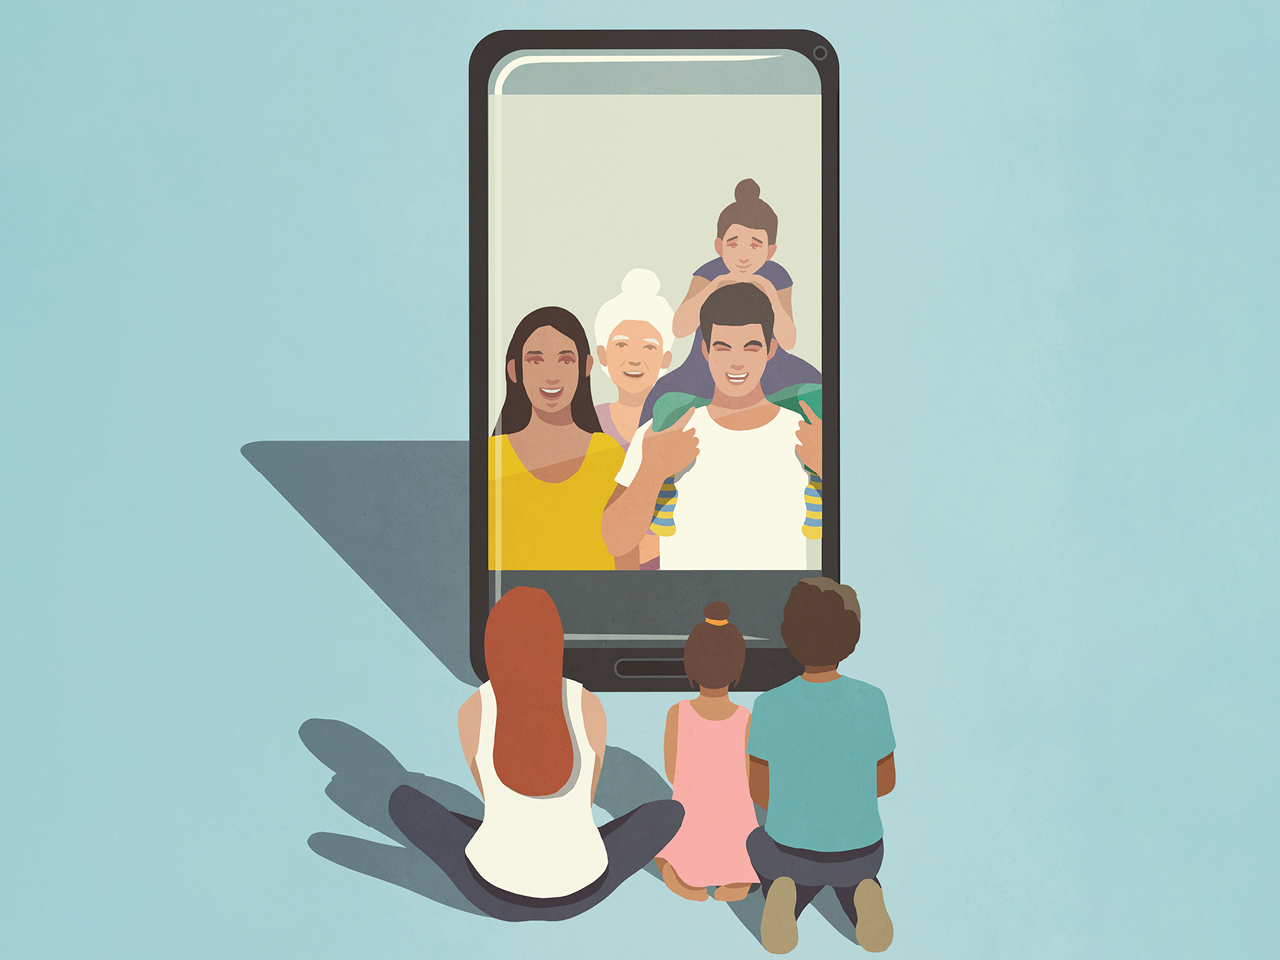 An illustration of a family video calling another family on a large Iphone